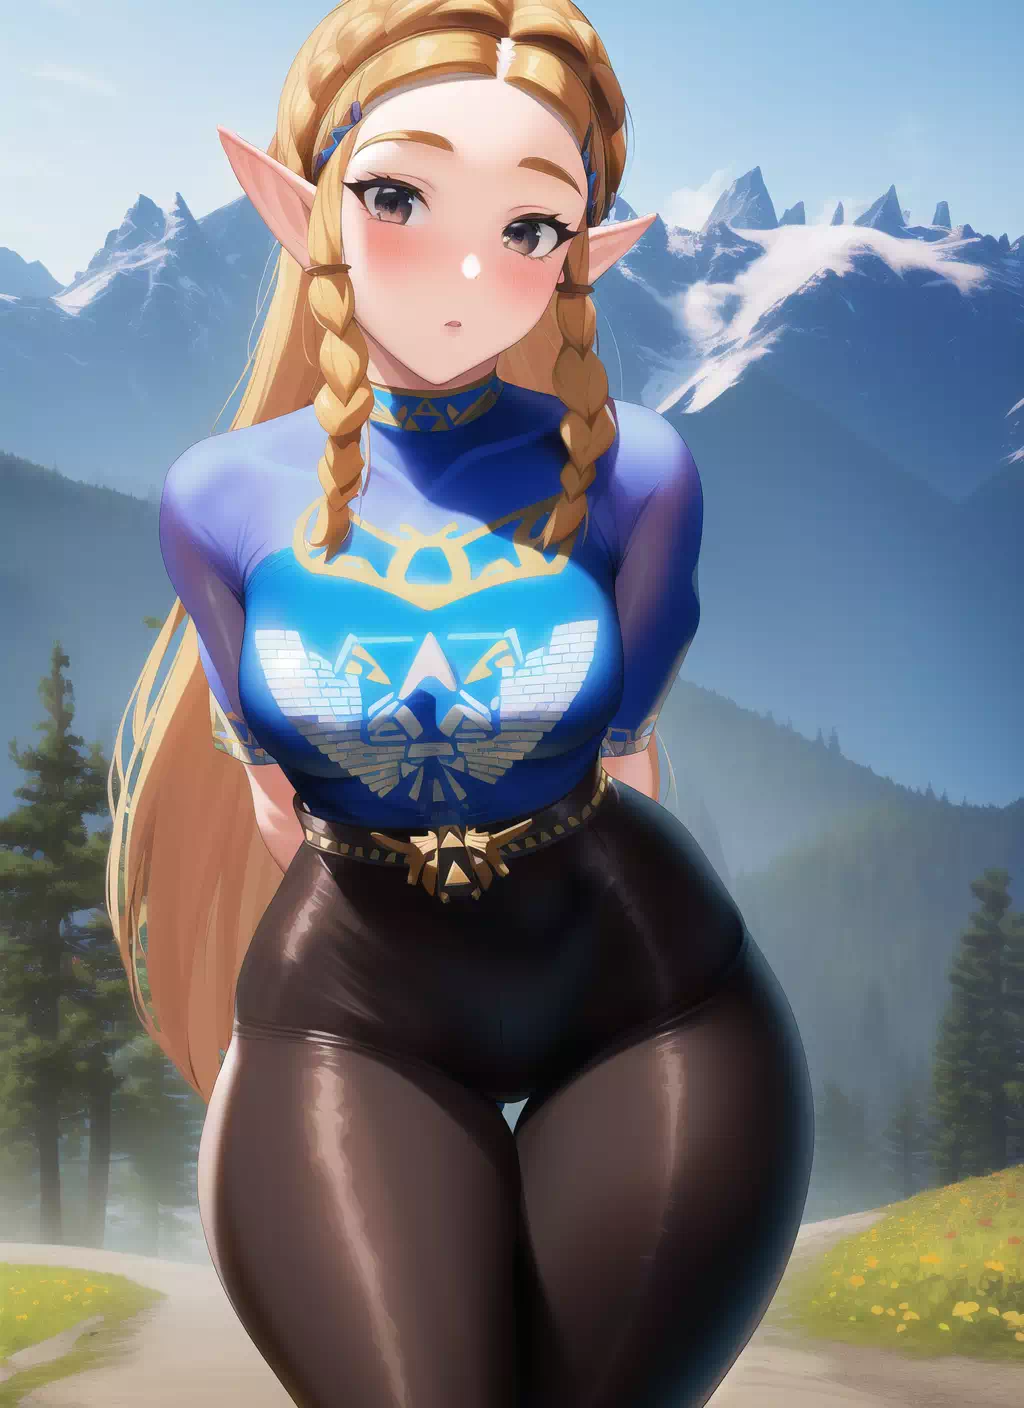 Zelda in the mountains